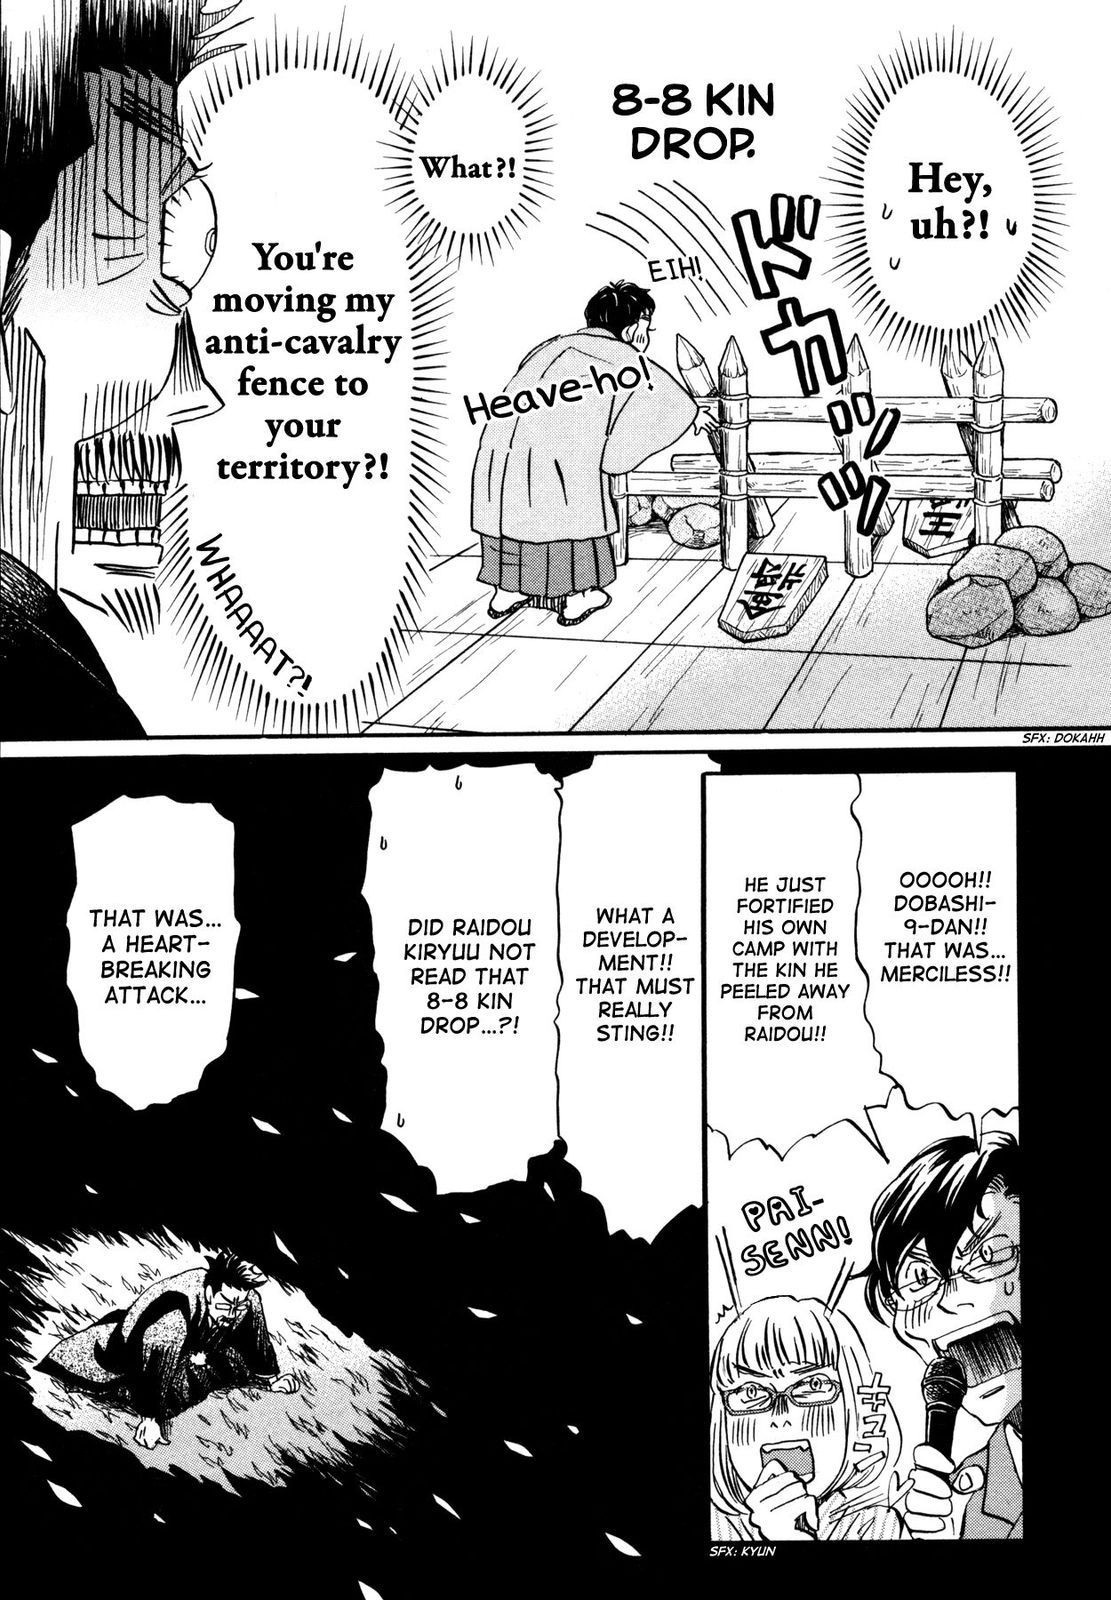 March Comes in Like a Lion, Chapter 119 The Satsuma Arc (Part 3) (EN) image 11